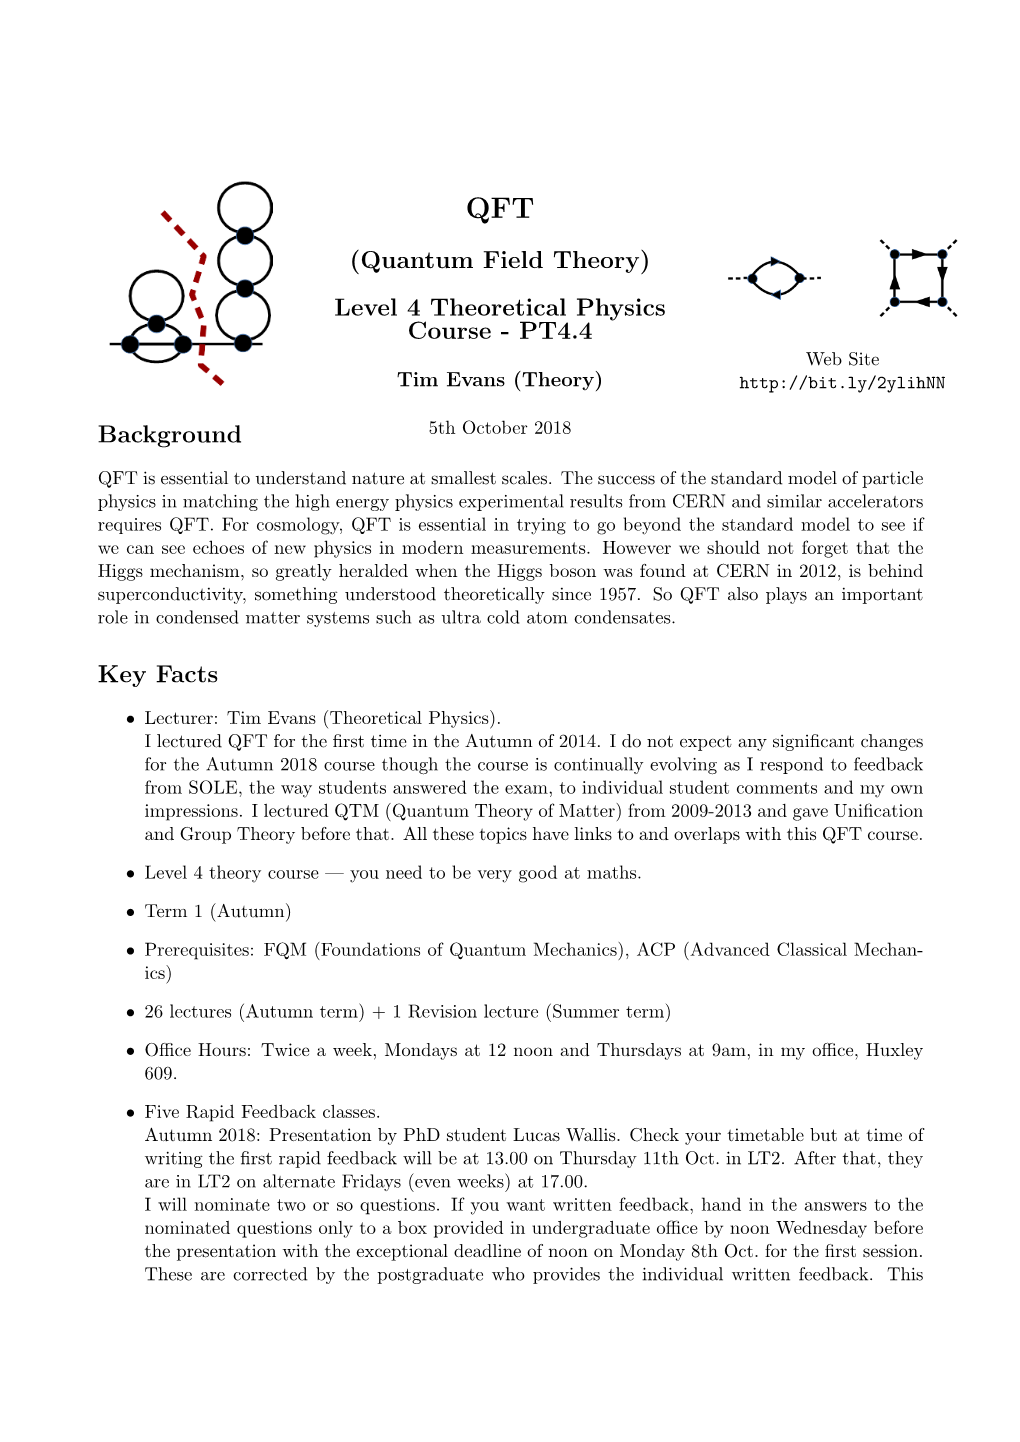 Quantum Field Theory) Level 4 Theoretical Physics Course - PT4.4 Web Site Tim Evans (Theory